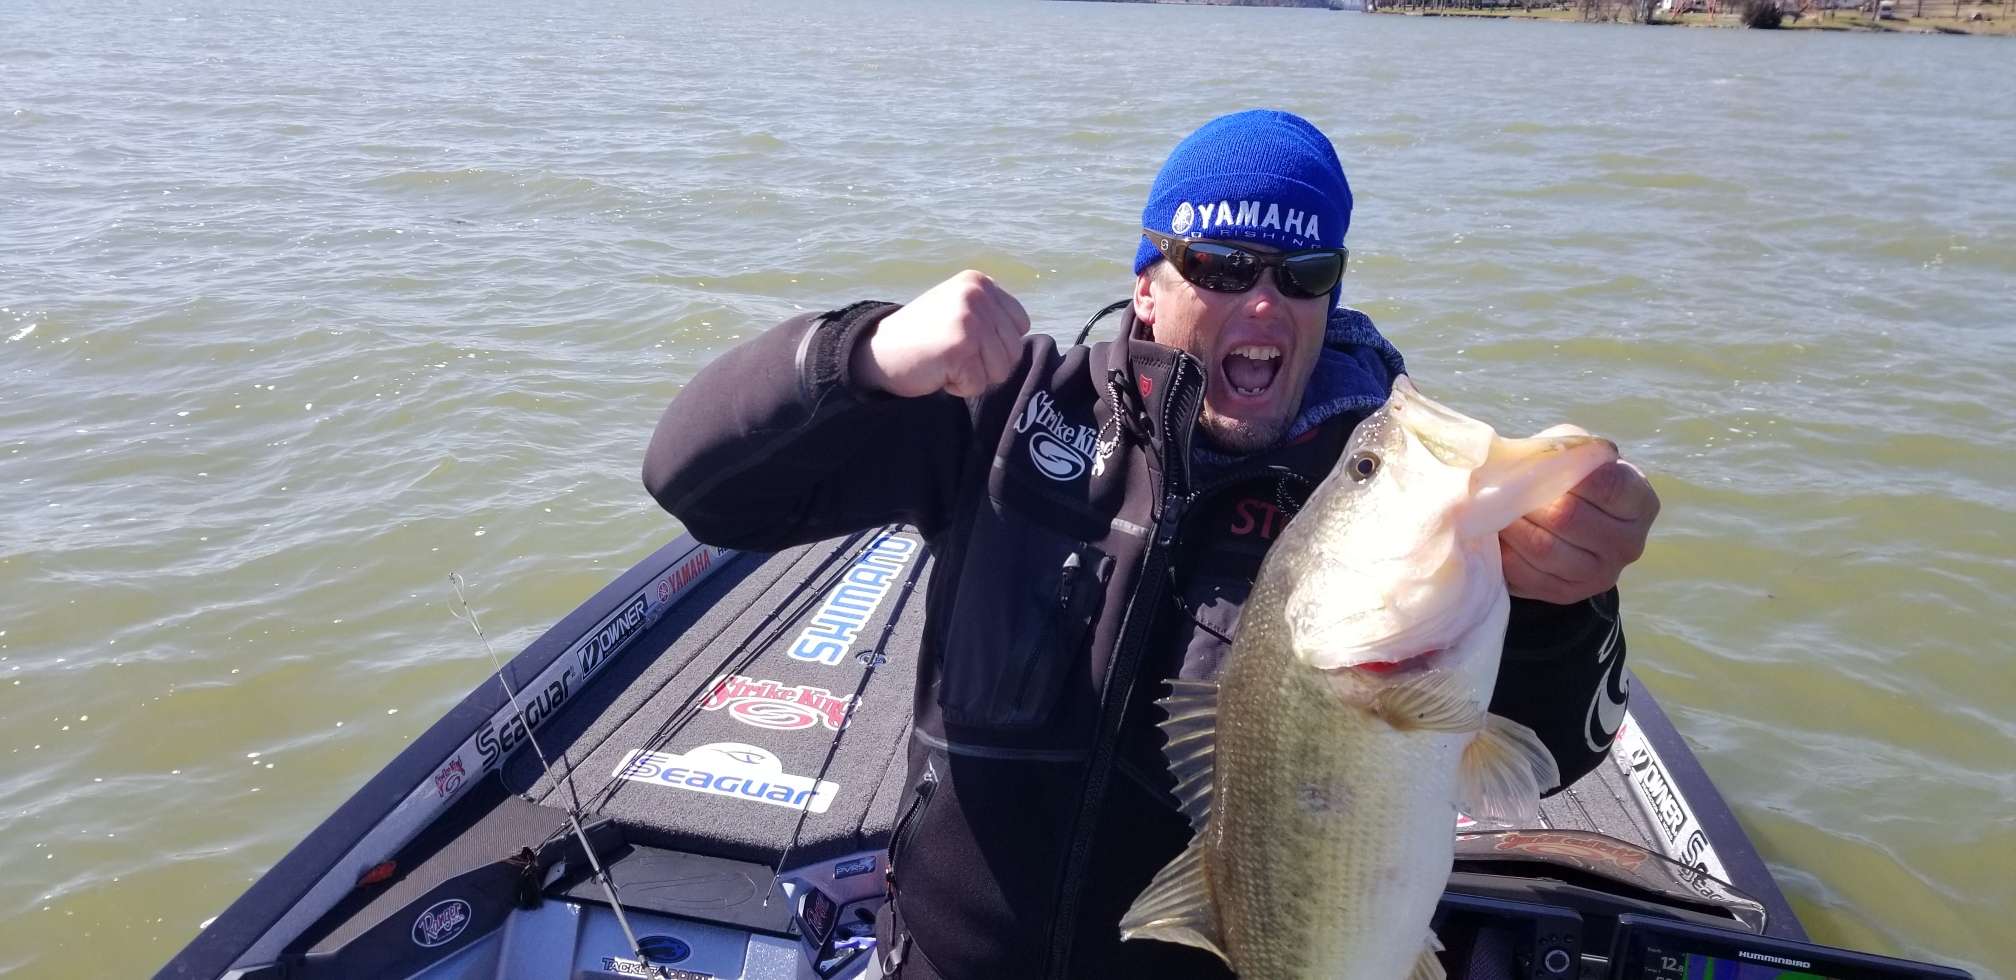 Combs snags a six pounder and starts breakdancing in the boat!